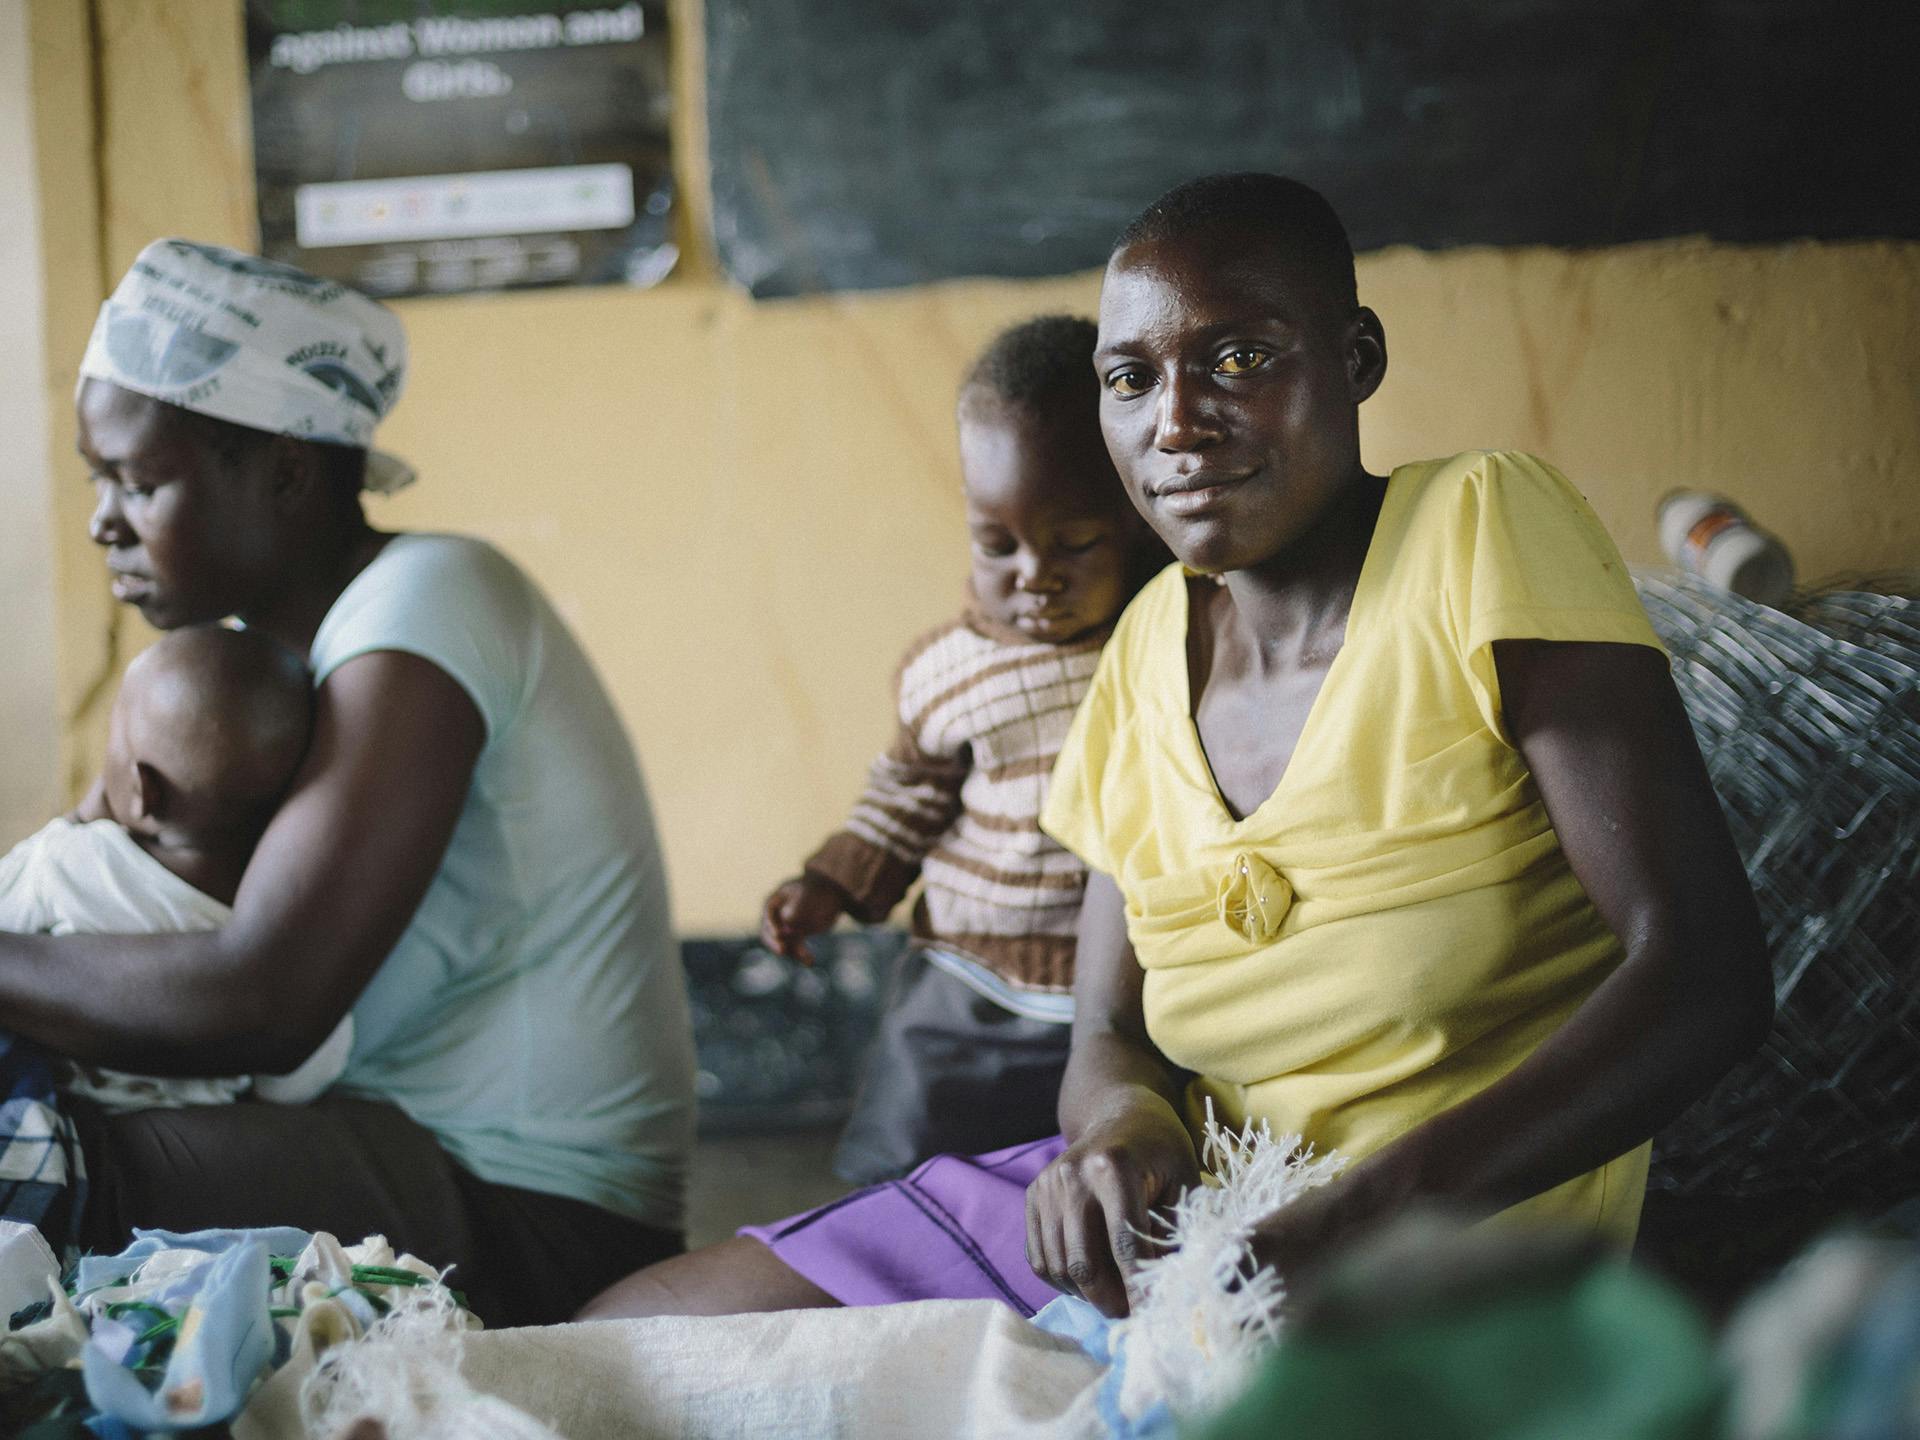 A Zimbabwean woman sitting on a floor sewing with her baby next to her.